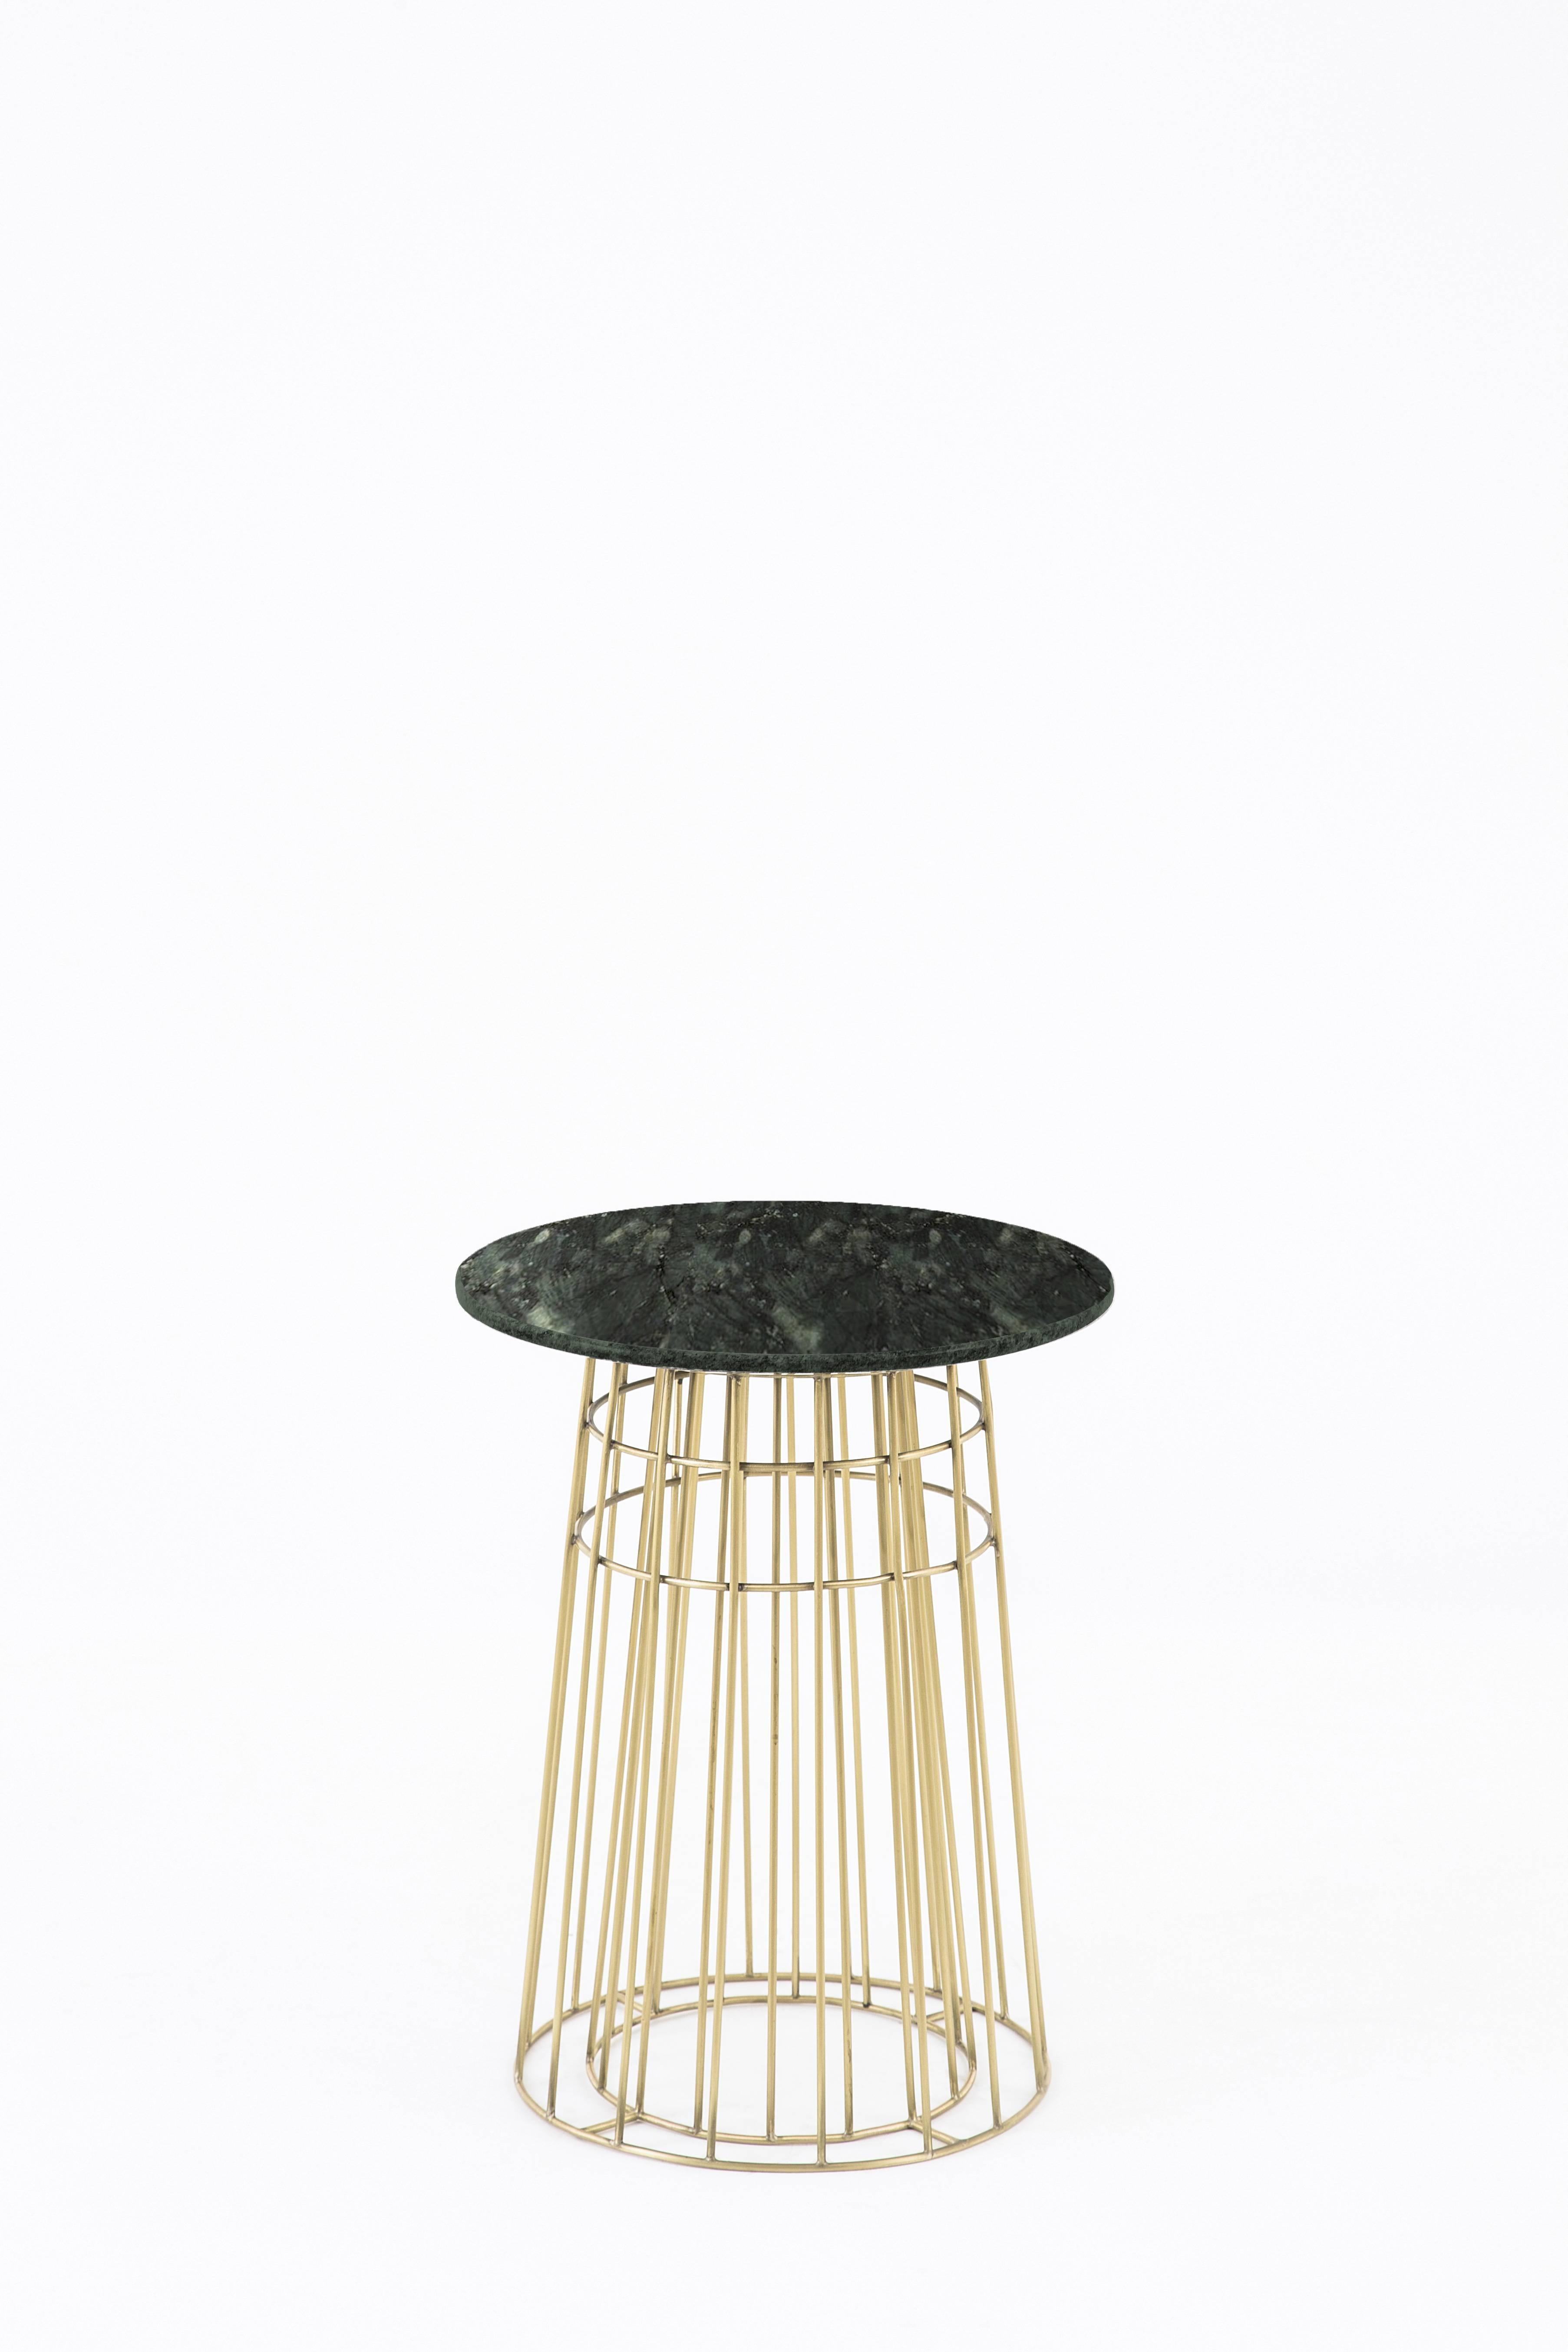 Contemporary Side Table or Tray Table in Granite and Brass For Sale 1